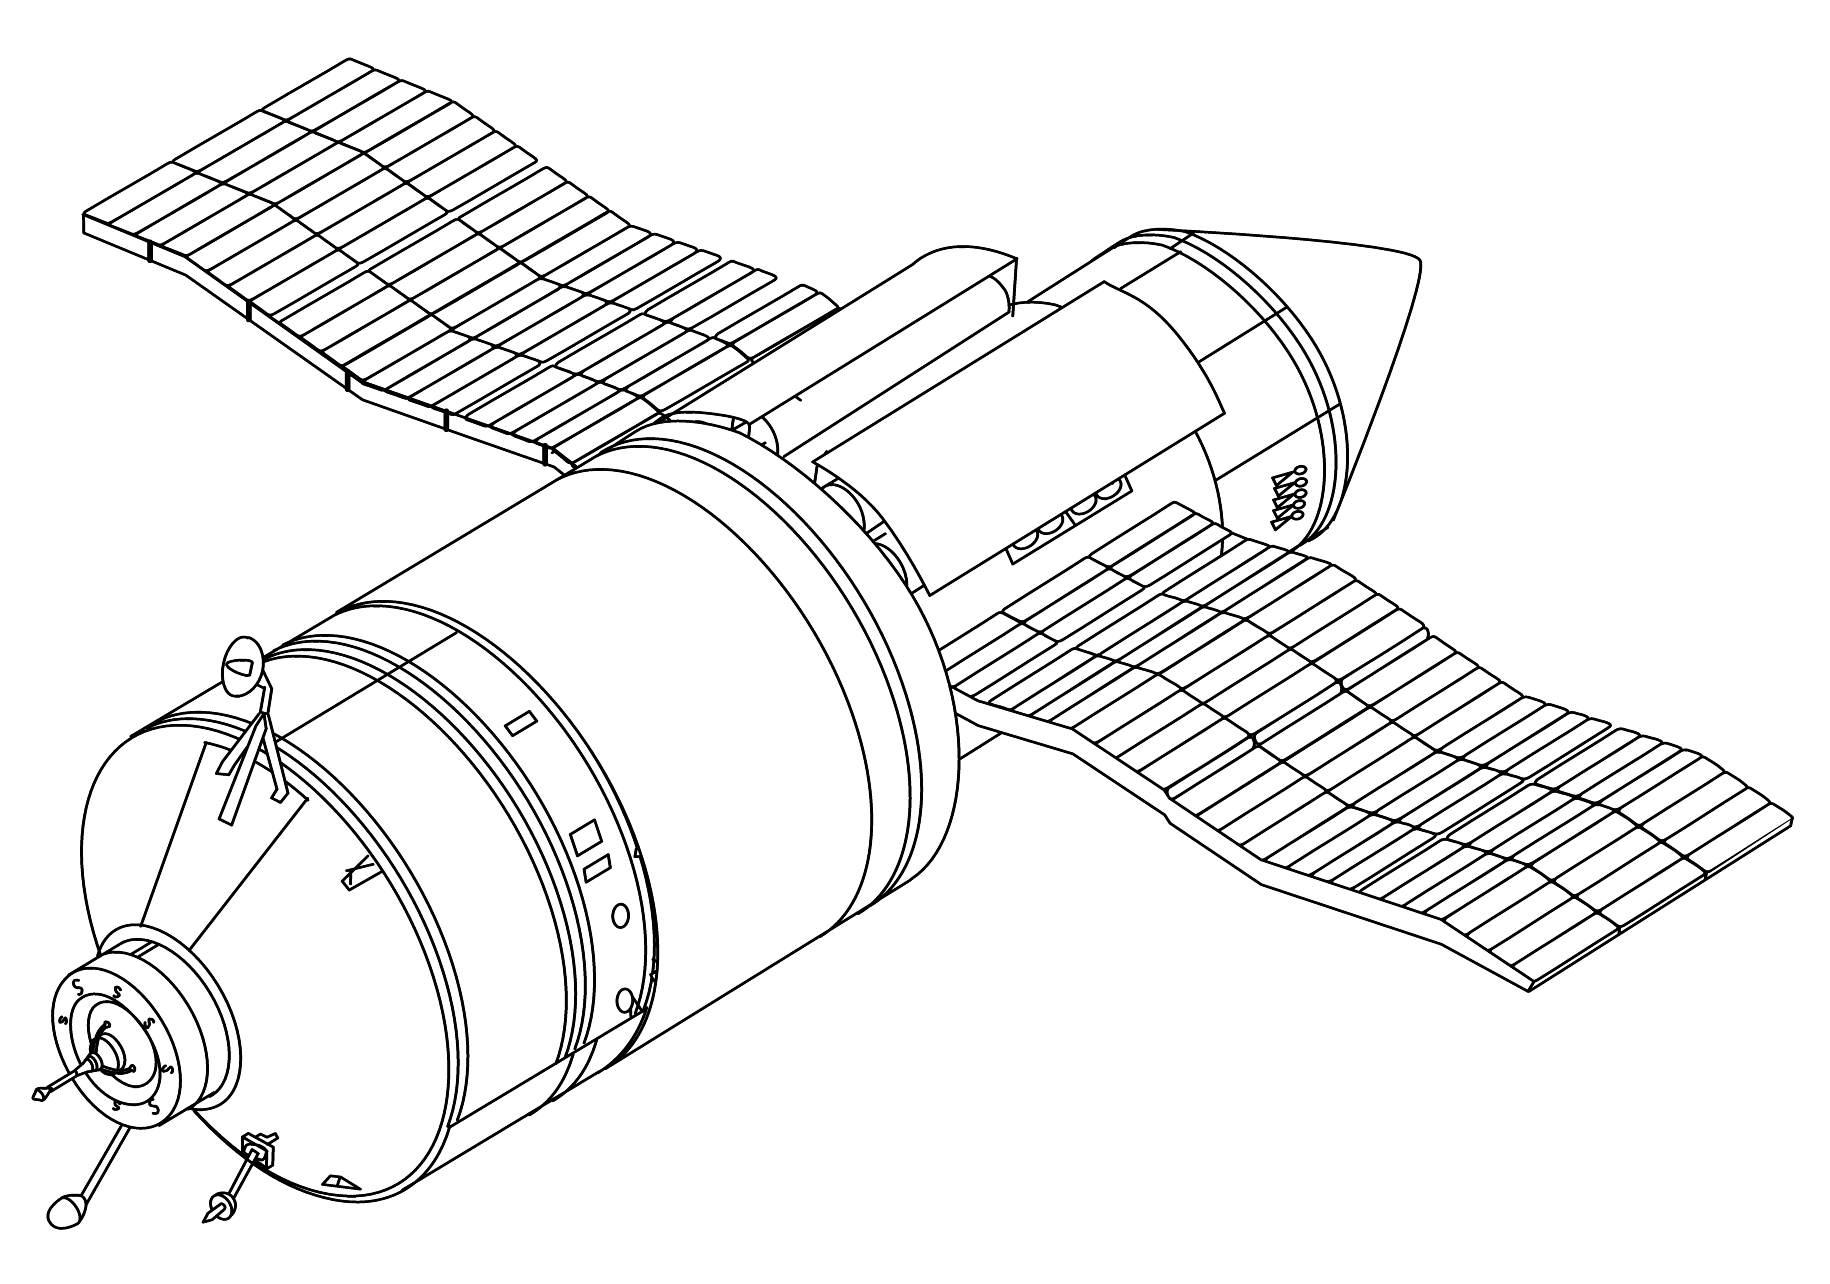 Kvant_module_and_FSM_drawing.png